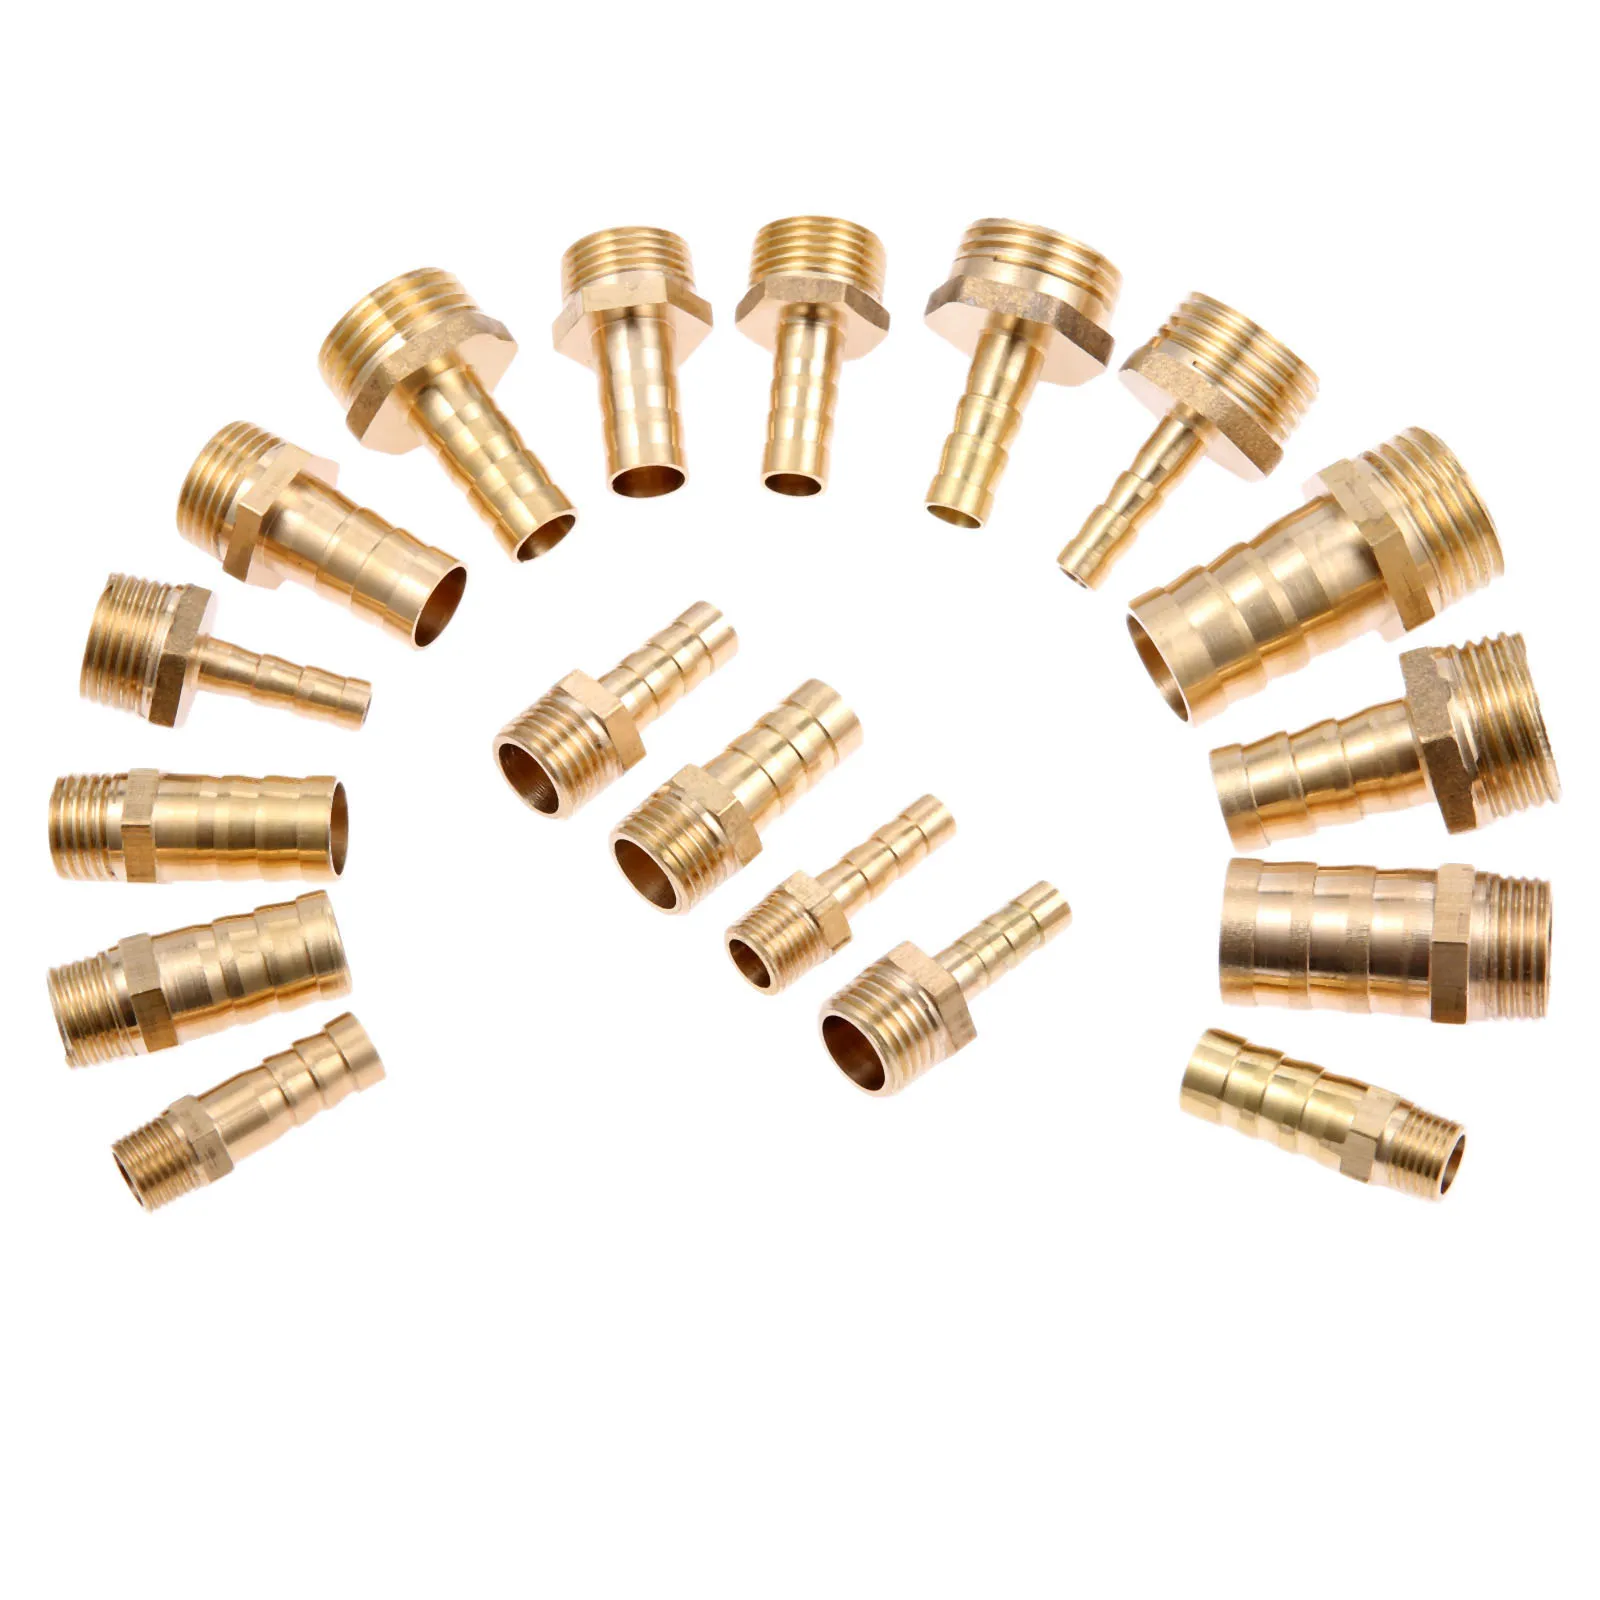 

5Pc Brass Pipe Fitting 6mm 8mm 10mm 12mm 16mm Hose Barb Tail 1/8" 1/4" 1/2" 3/8" Male Threaded Connector Joint Coupler Adapter